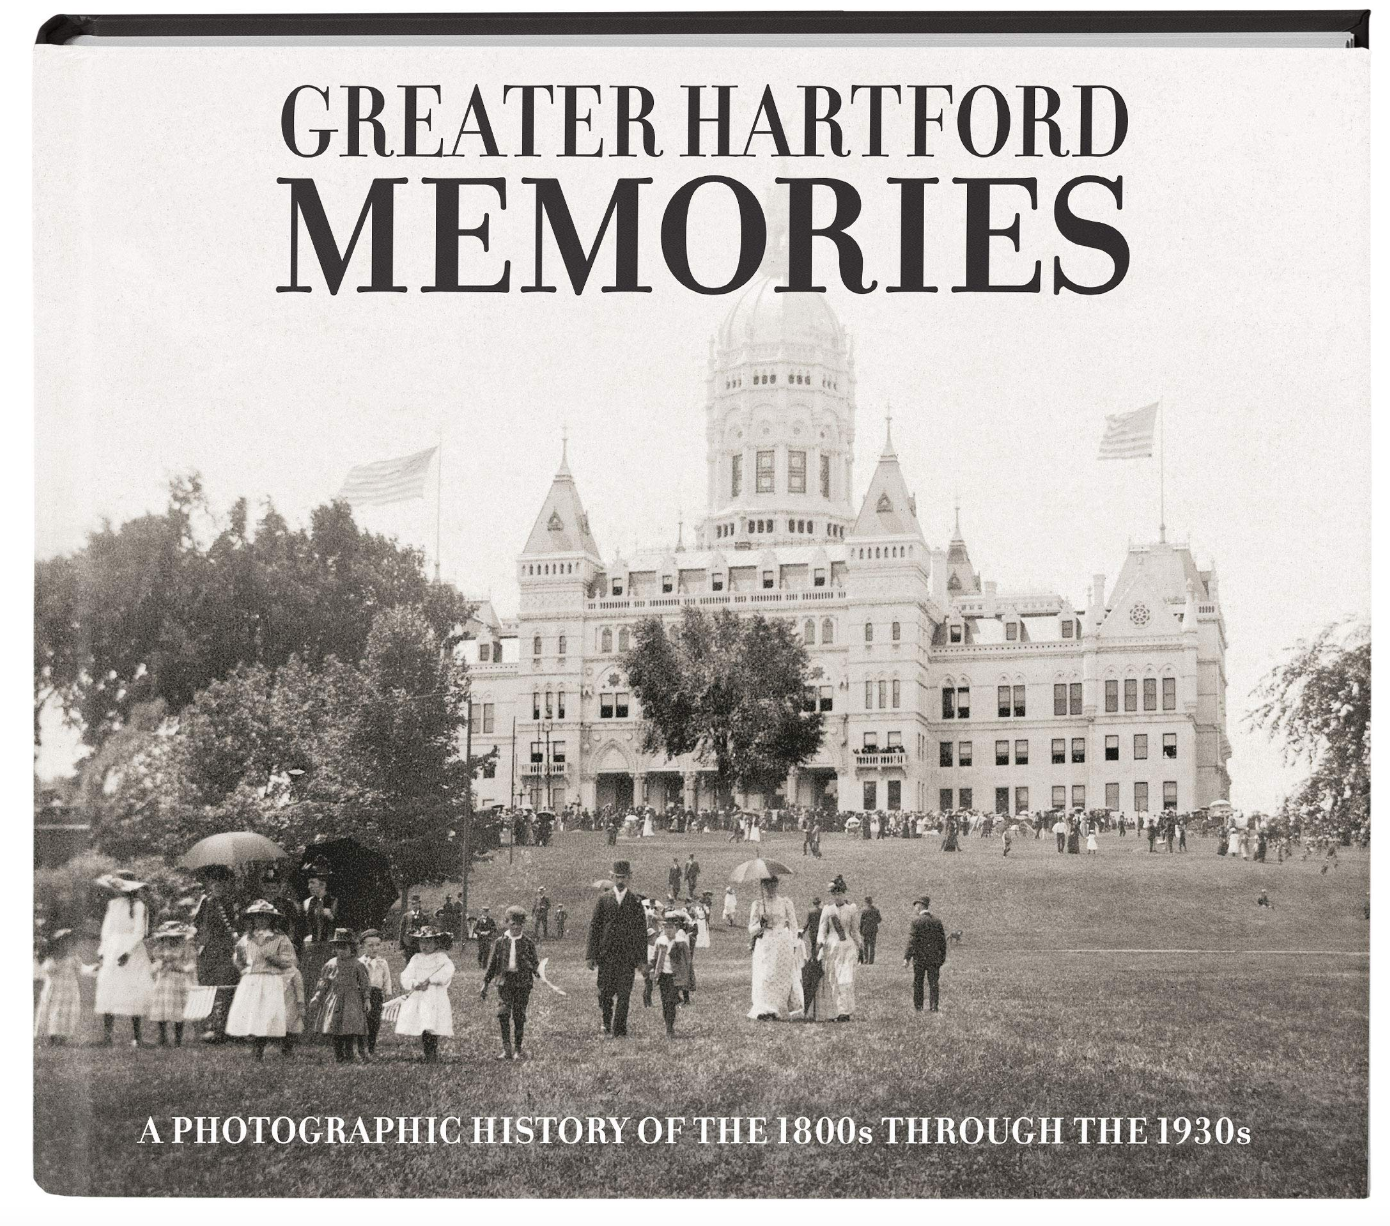 Greater Hartford Memories: A Photographic History of the 1800s through the 1930s